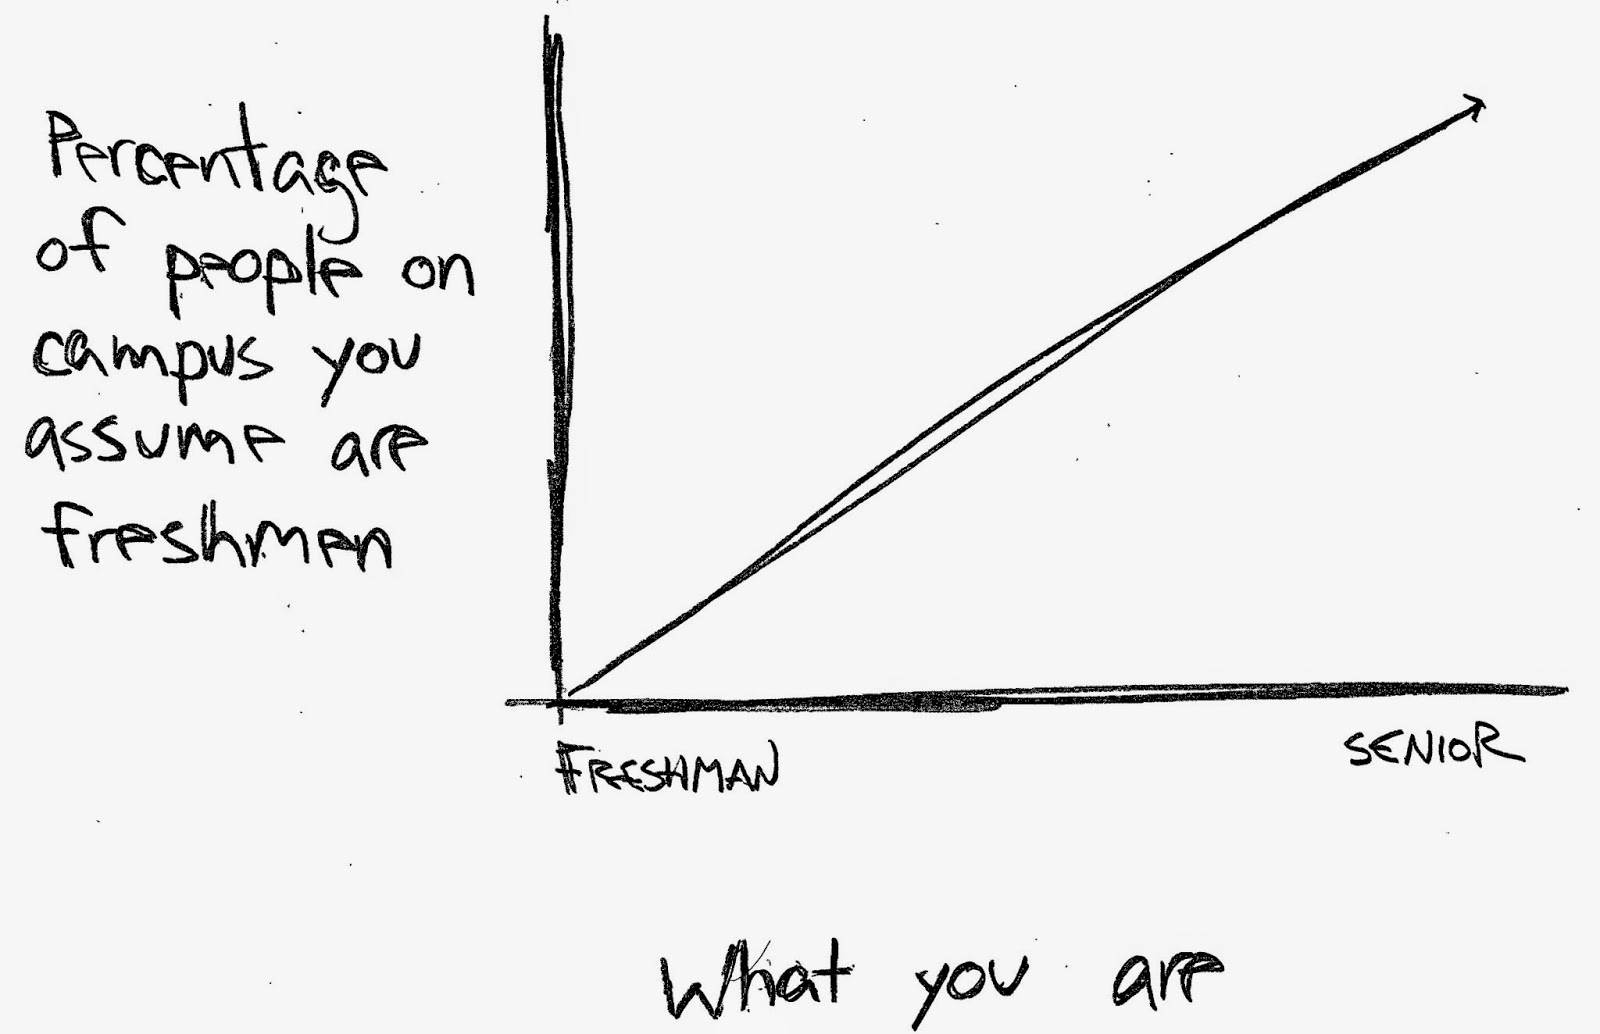 line graph representing positive correlation between "percentage of people on campus you assume are freshmen" and "what you are" increasing from "freshman" to "senior"